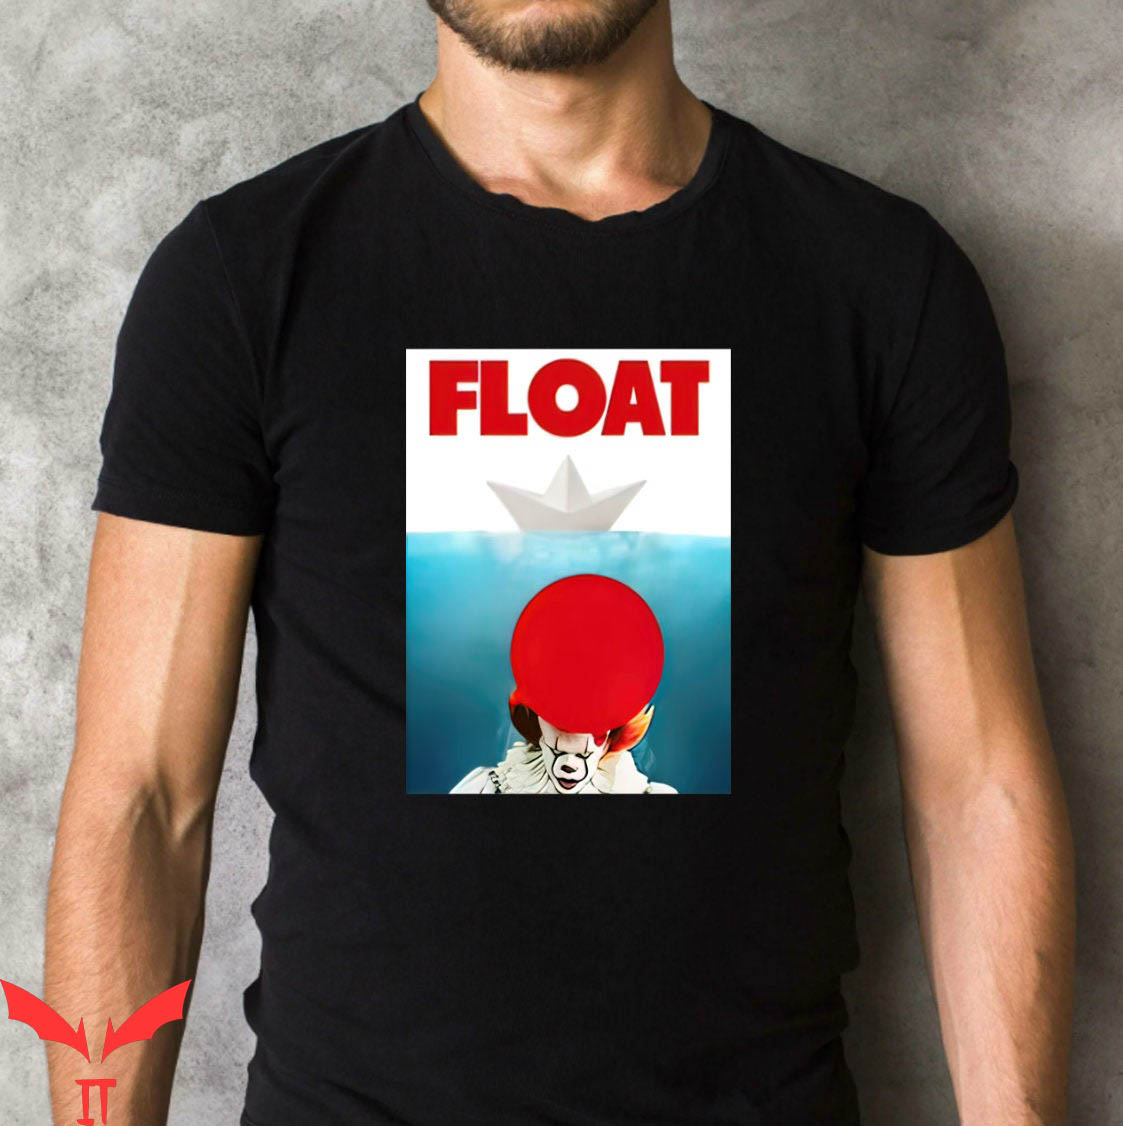 IT The Clown T-Shirt Float IT Pennywise Boat Horror Movie